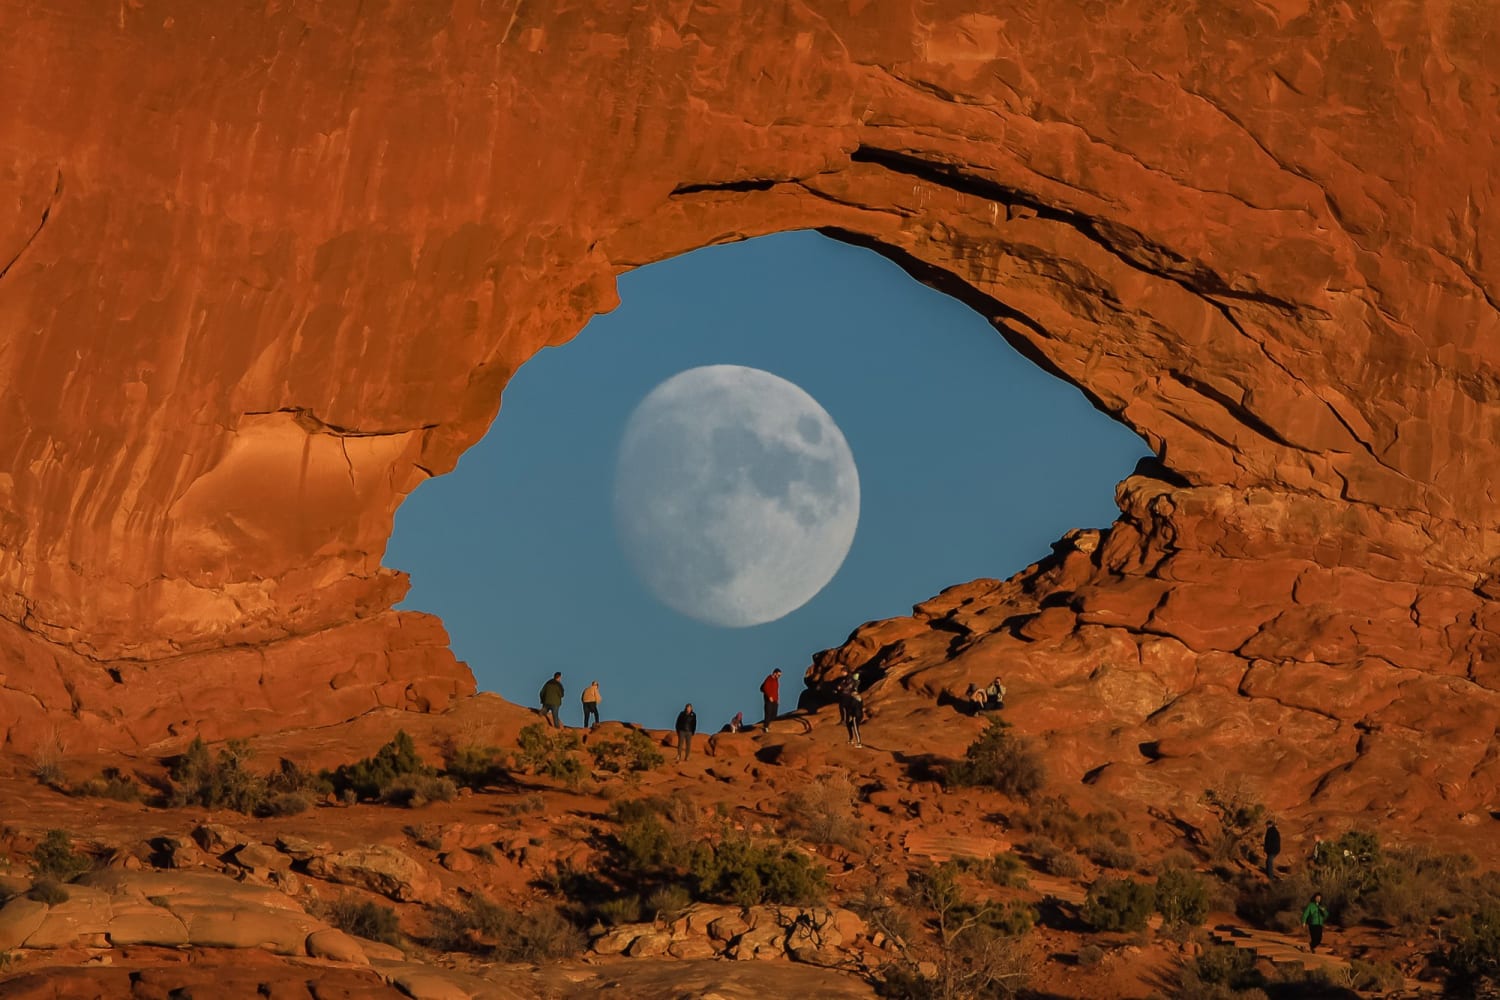 Arches National Park, Utah. Credit: Zack Cooley